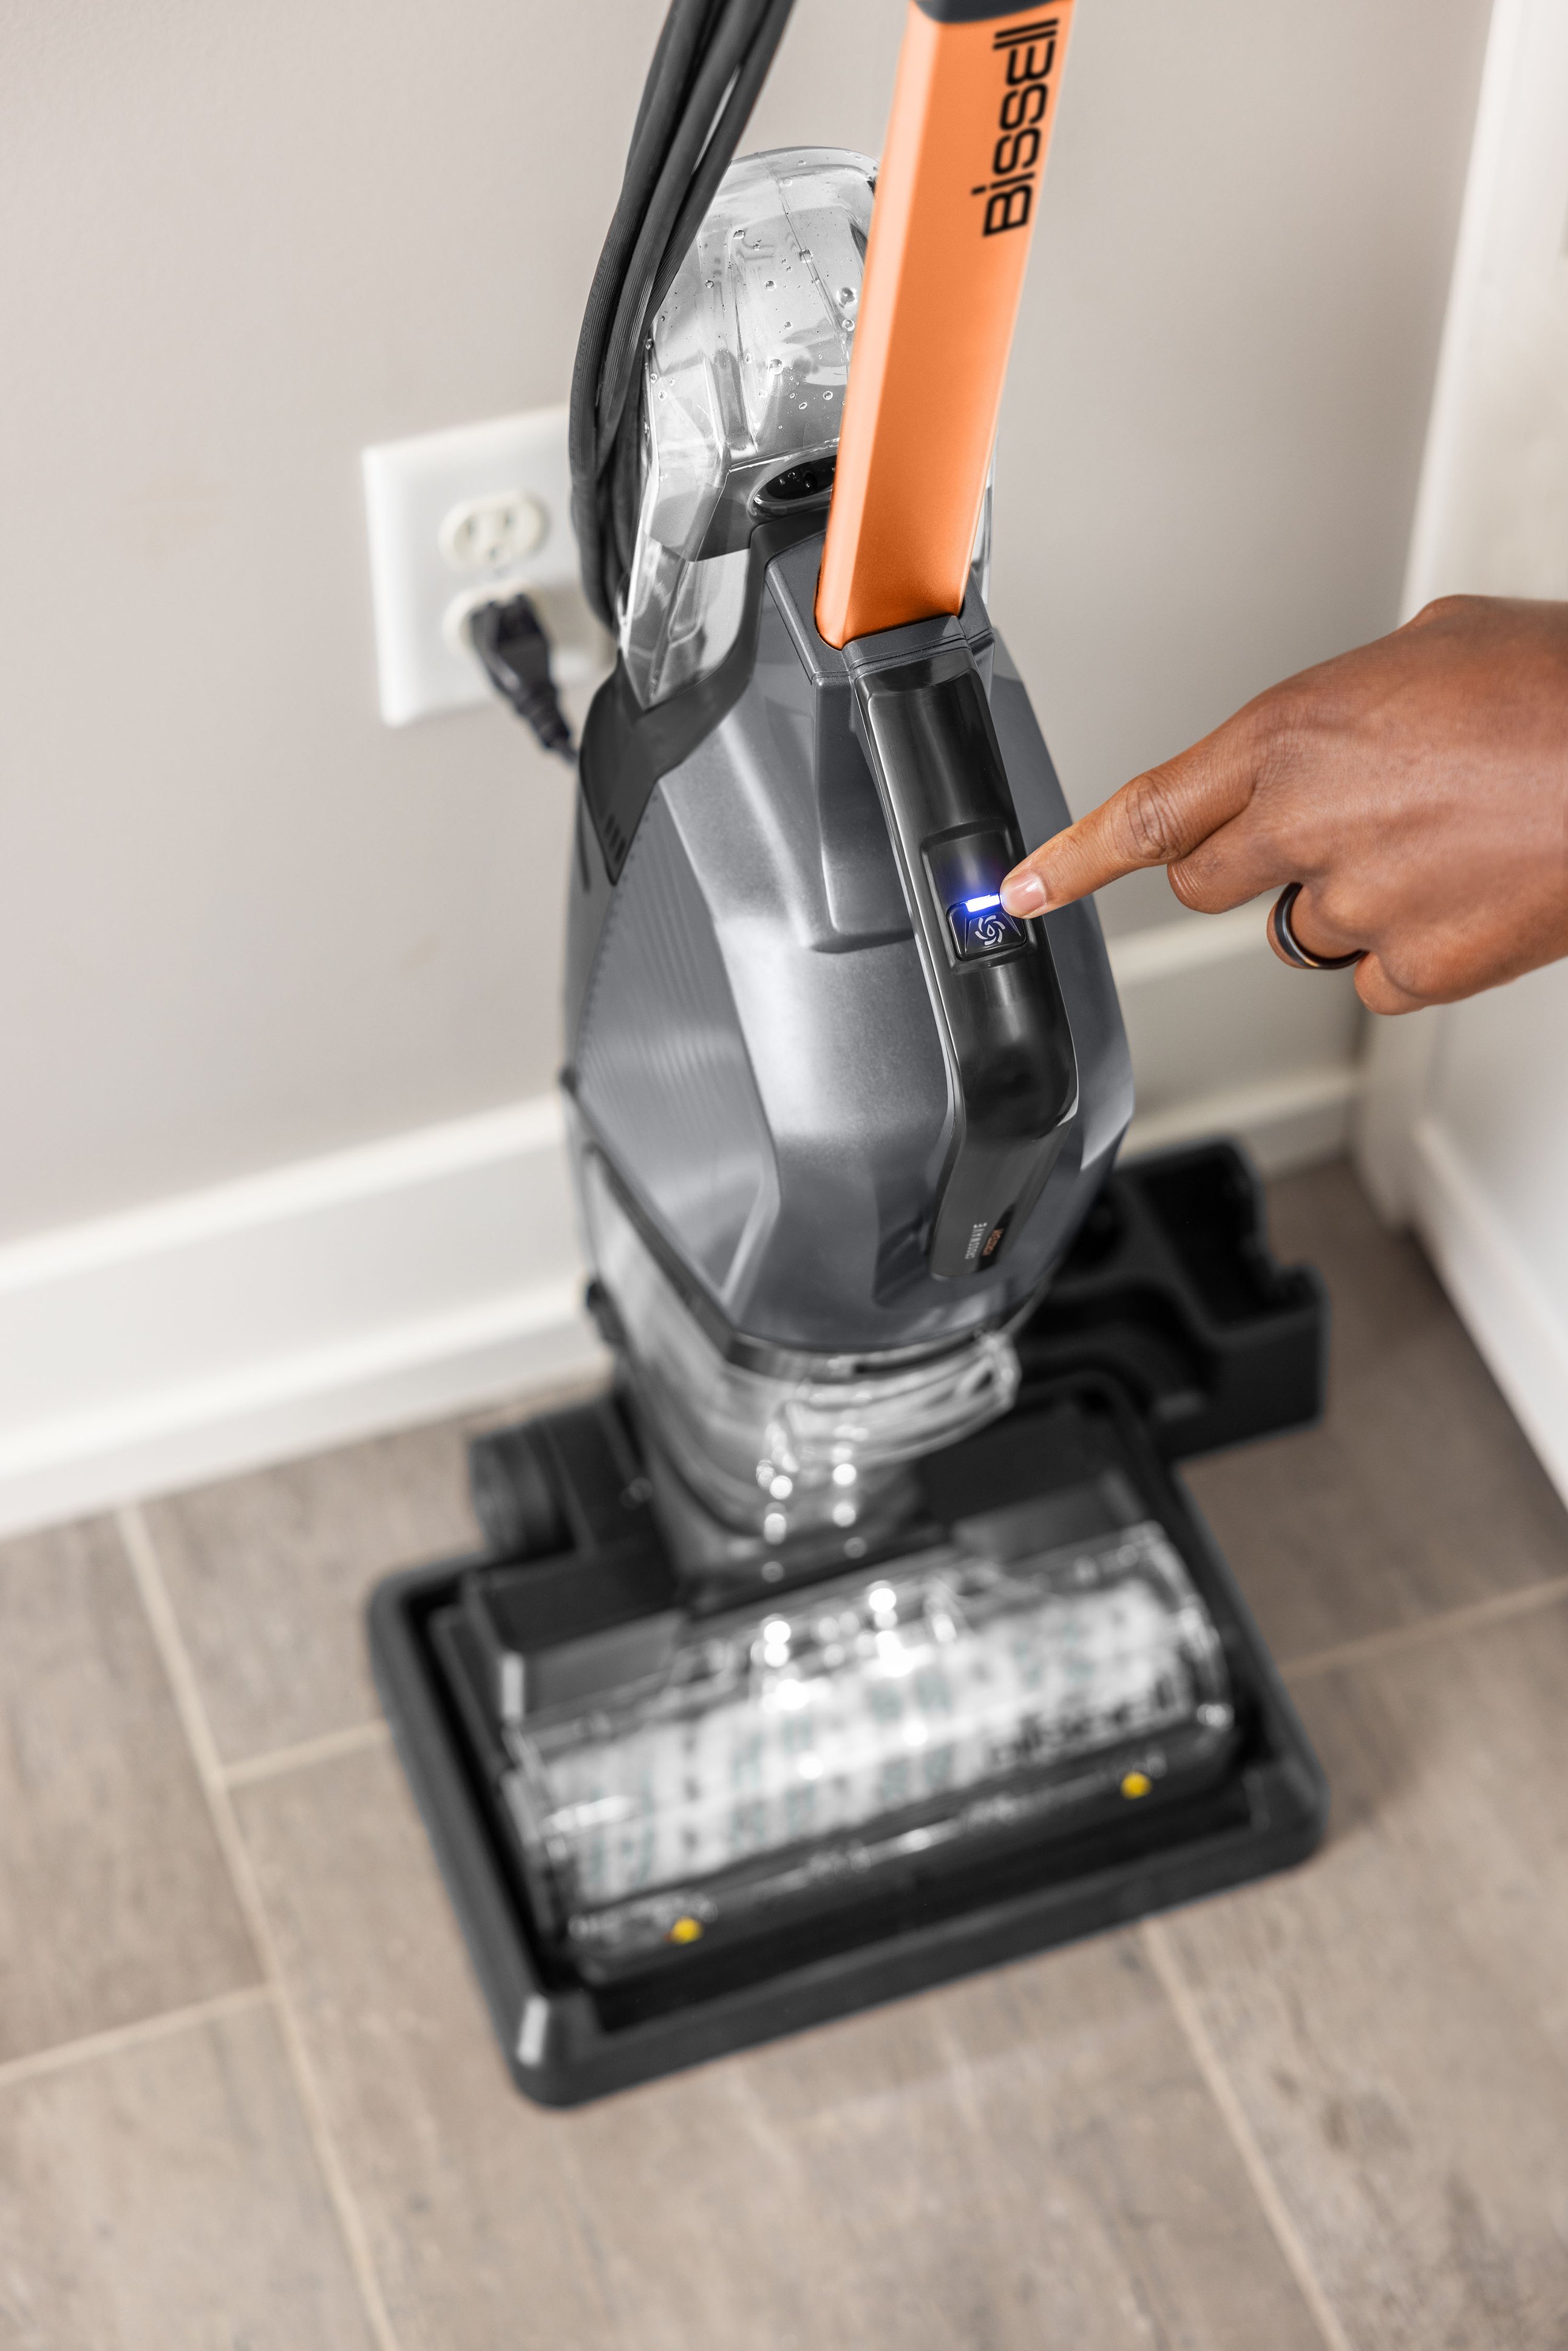 Bissell Crosswave Hydrosteam review: A powerful cleaning tool - Reviewed